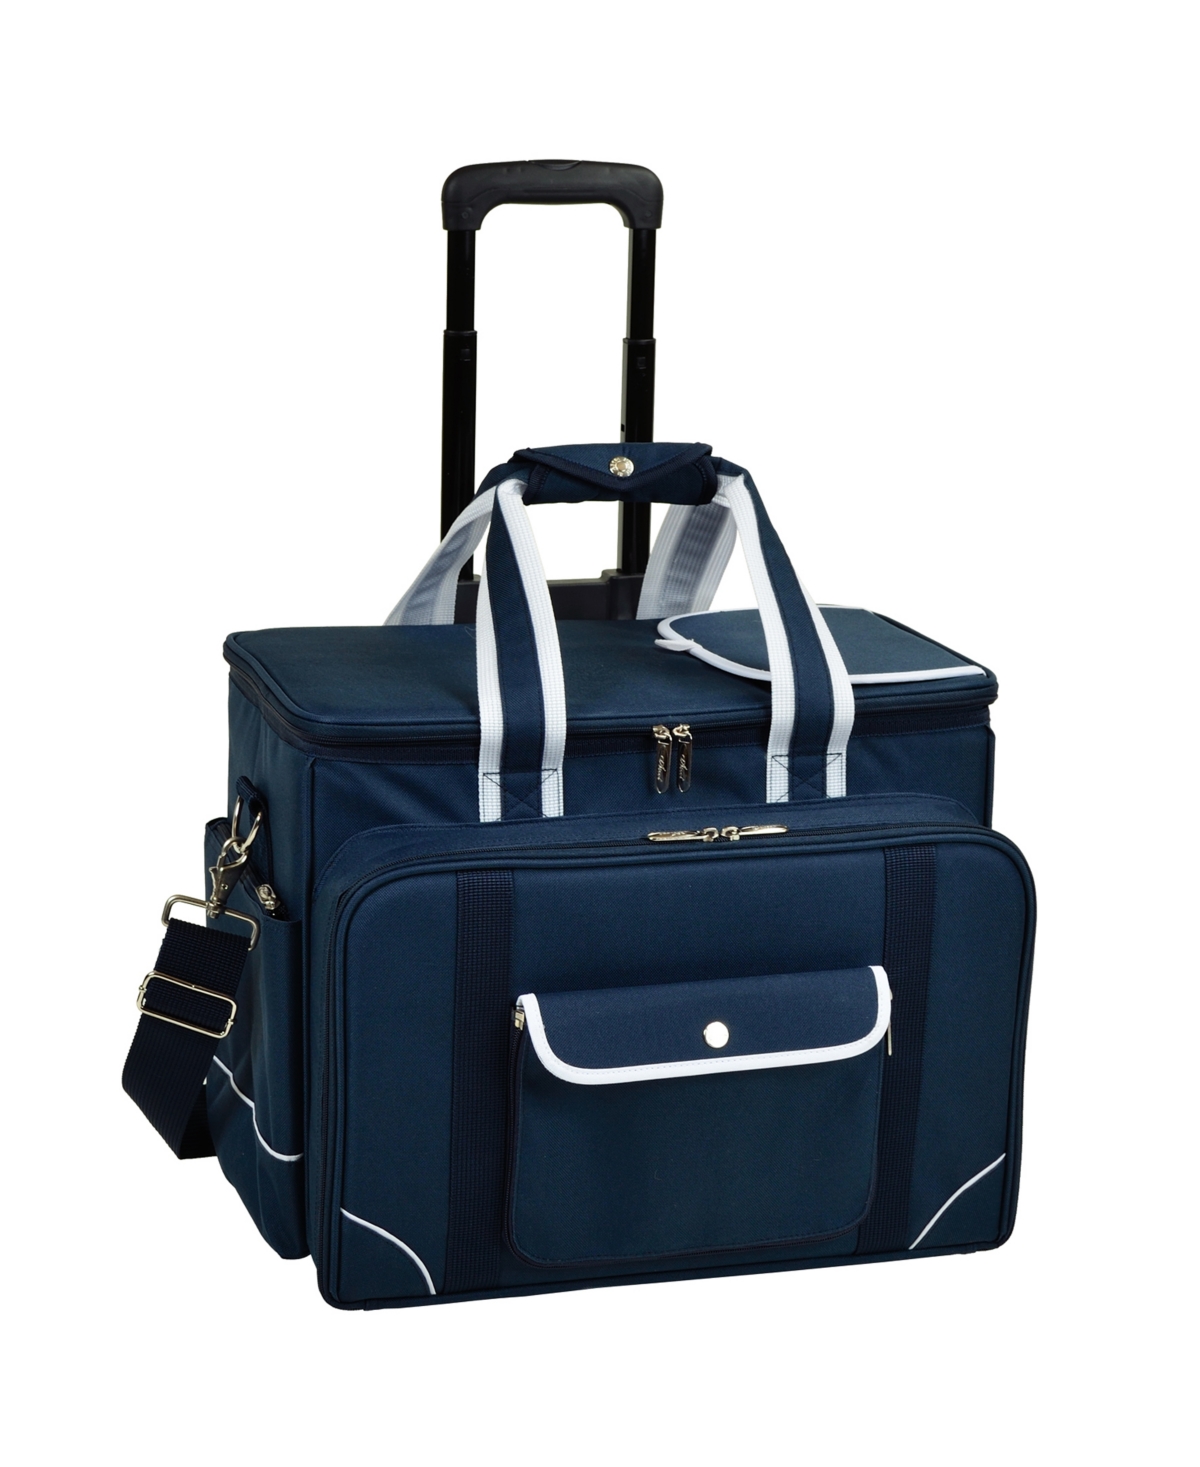 Ultimate Picnic Cooler for 4 with Accessories and Wheeled Cart - Navy